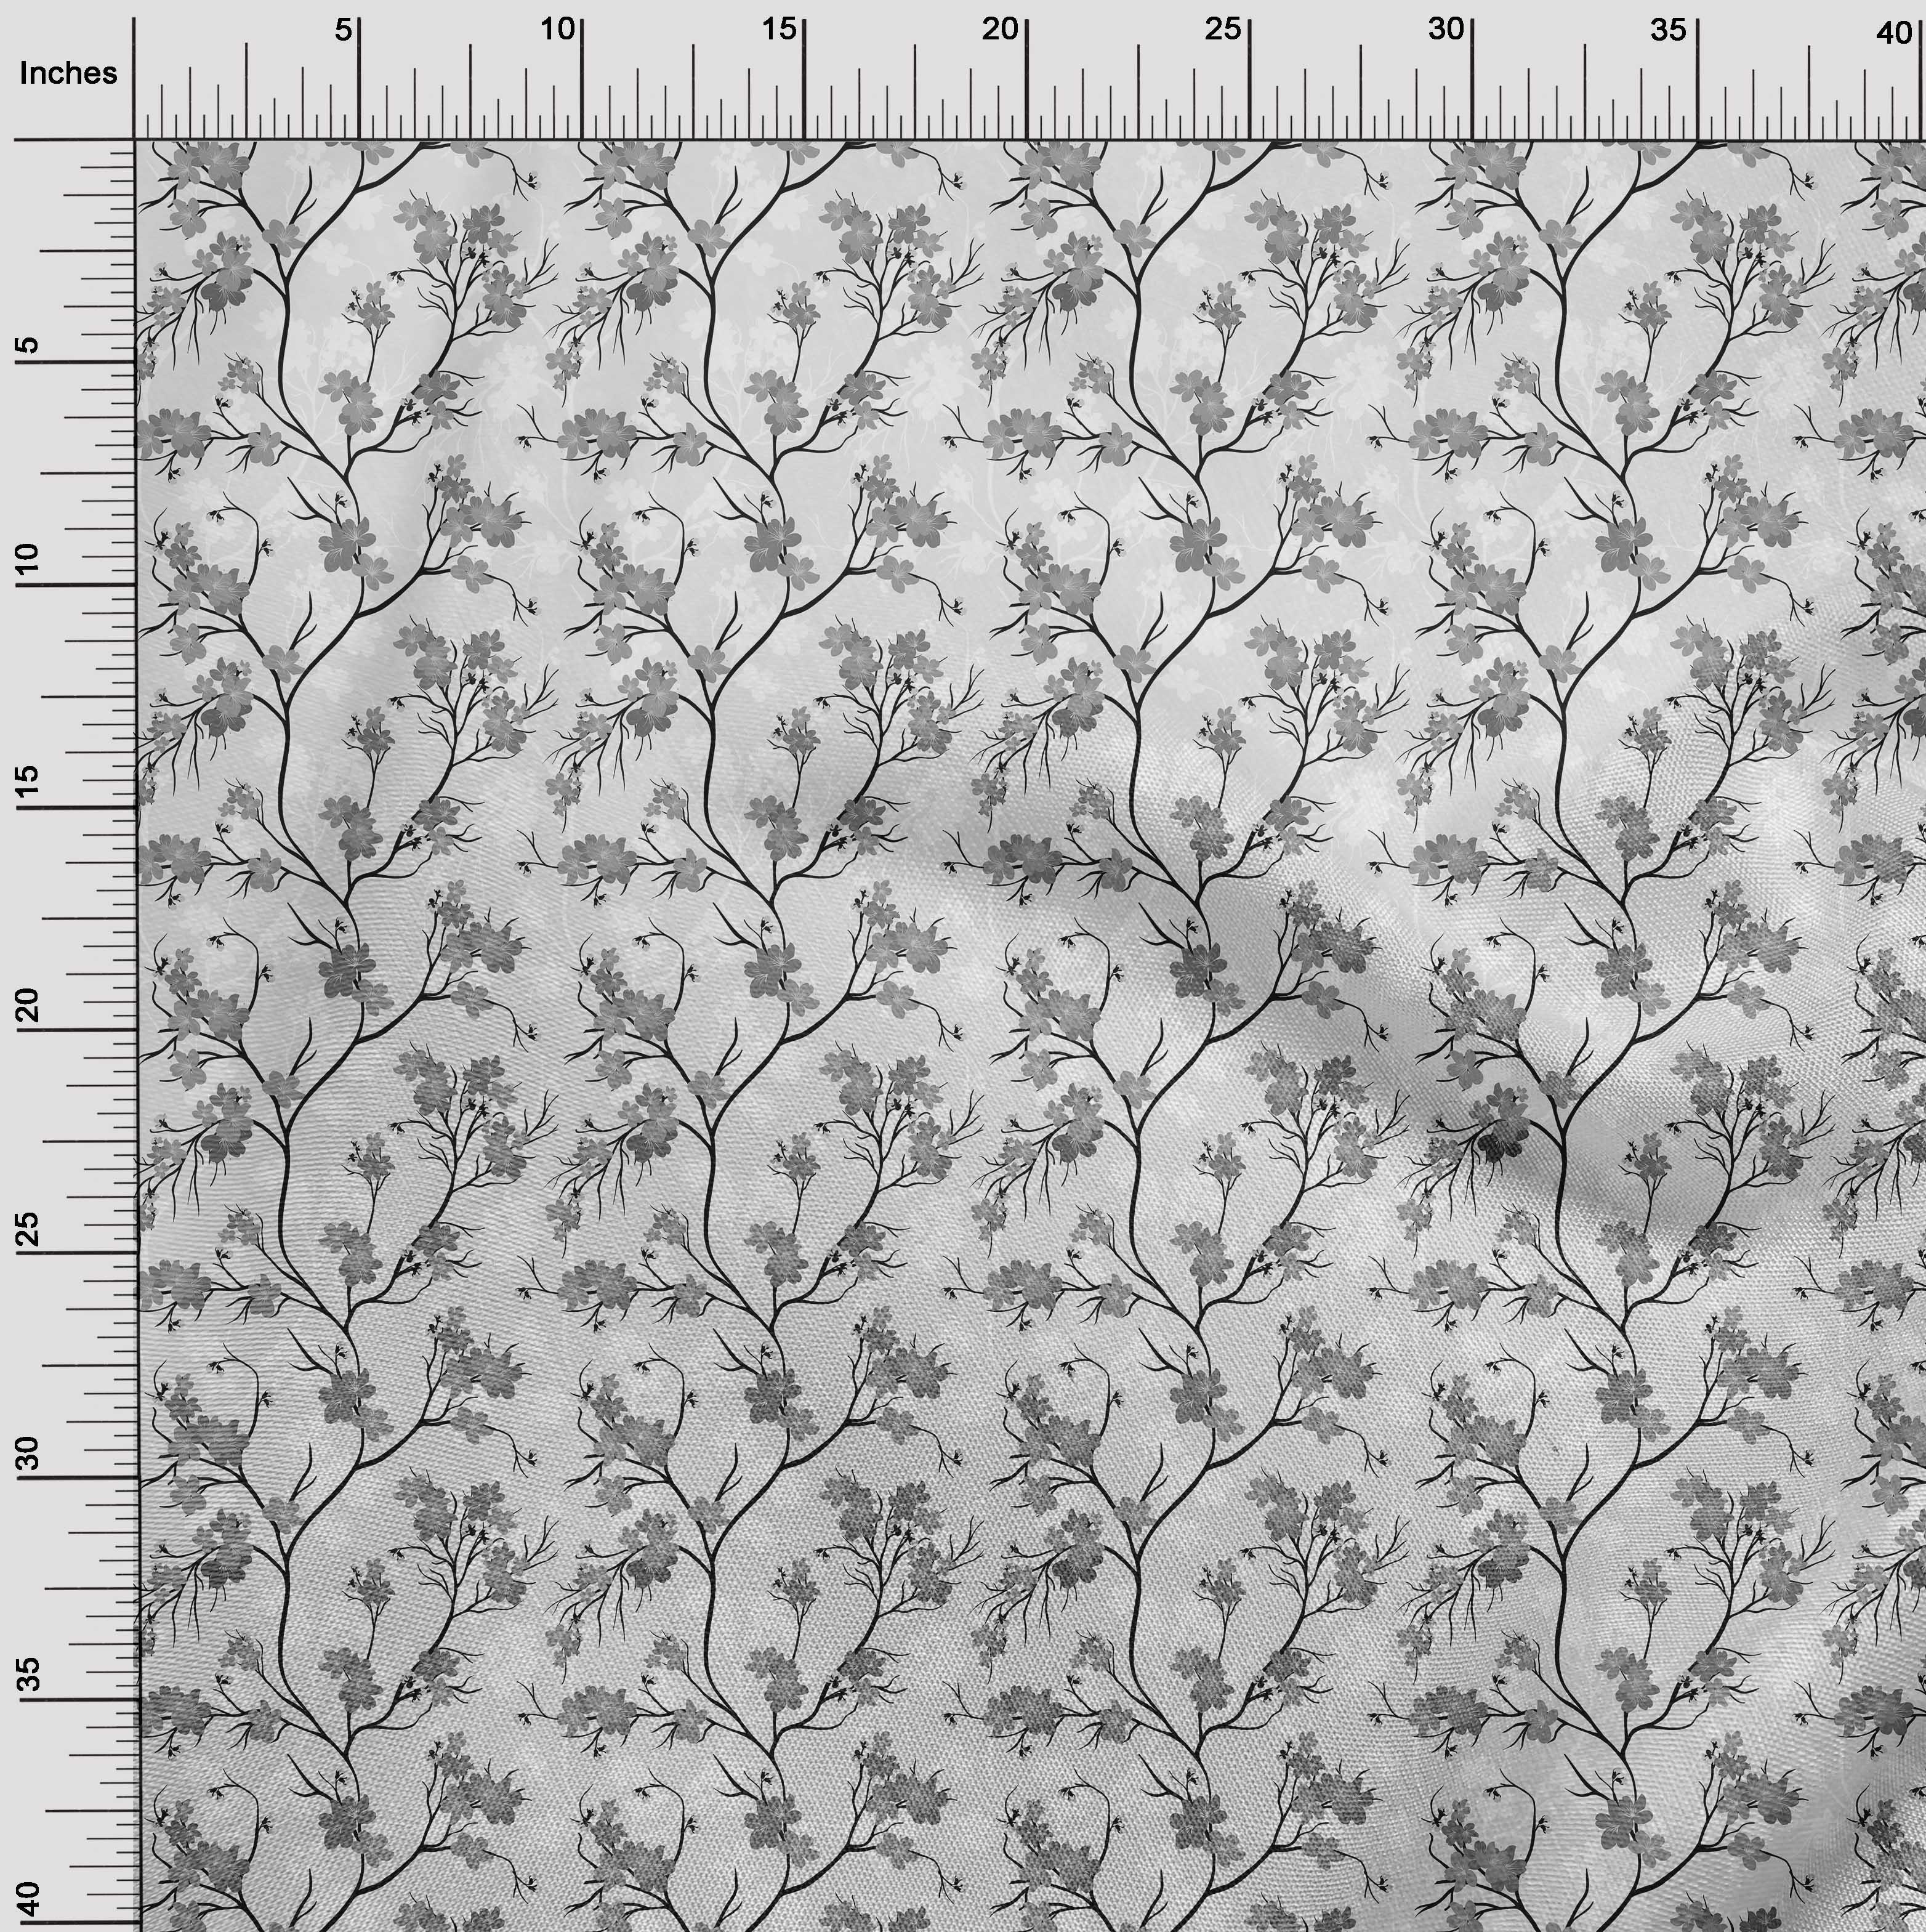 oneOone Polyester Spandex Gray Fabric Floral Sewing Material Print Fabric By The Yard 56 Inch Wide - image 4 of 5